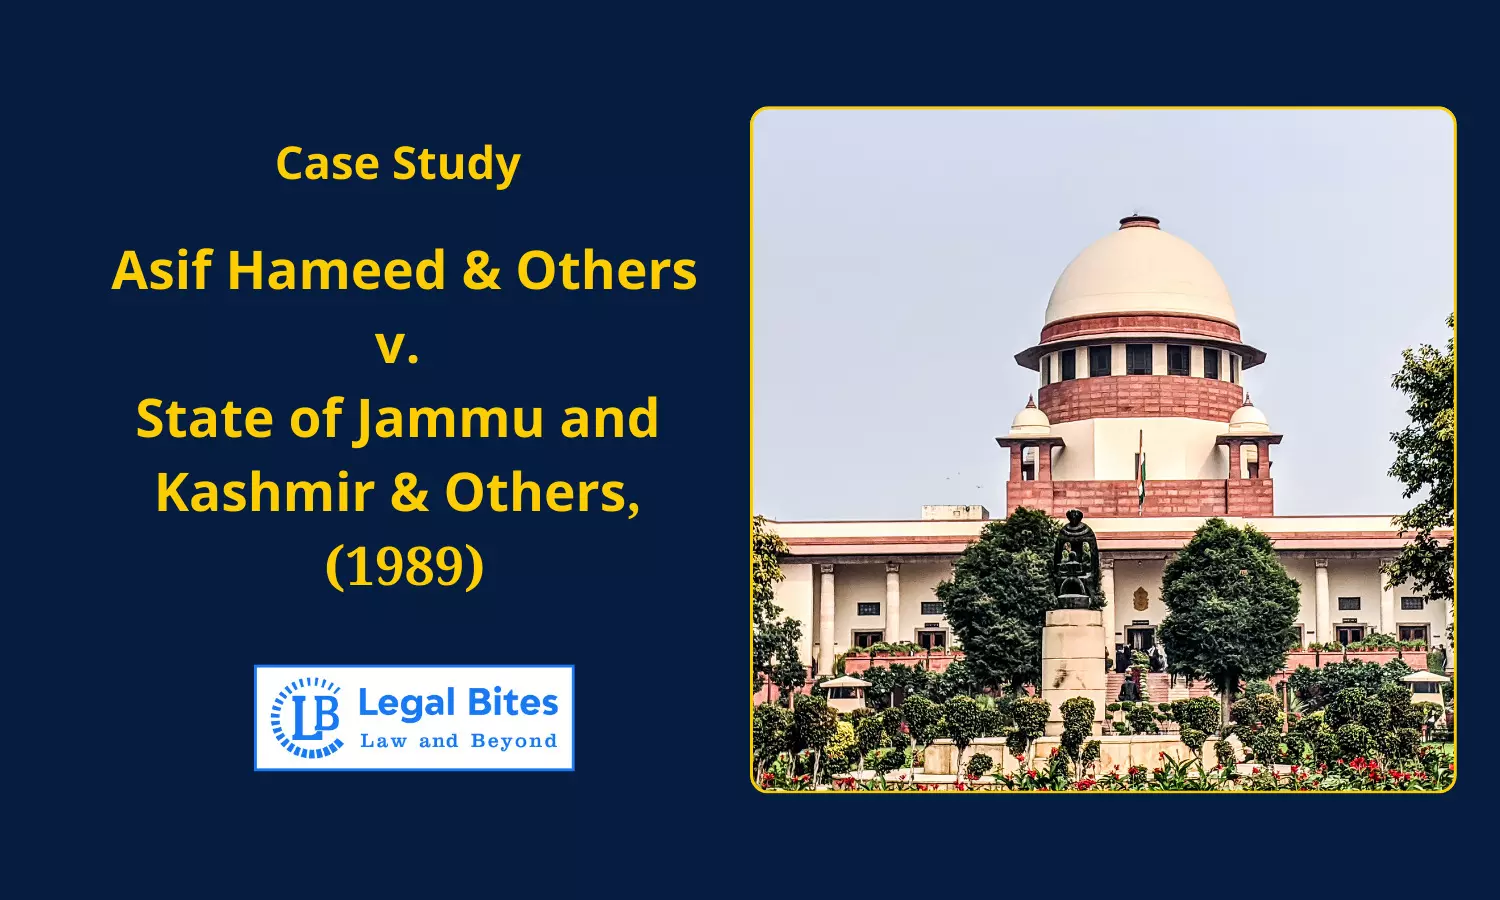 Case Study: Asif Hameed & Others v. State of Jammu and Kashmir & Others, (1989) | Separation of Powers